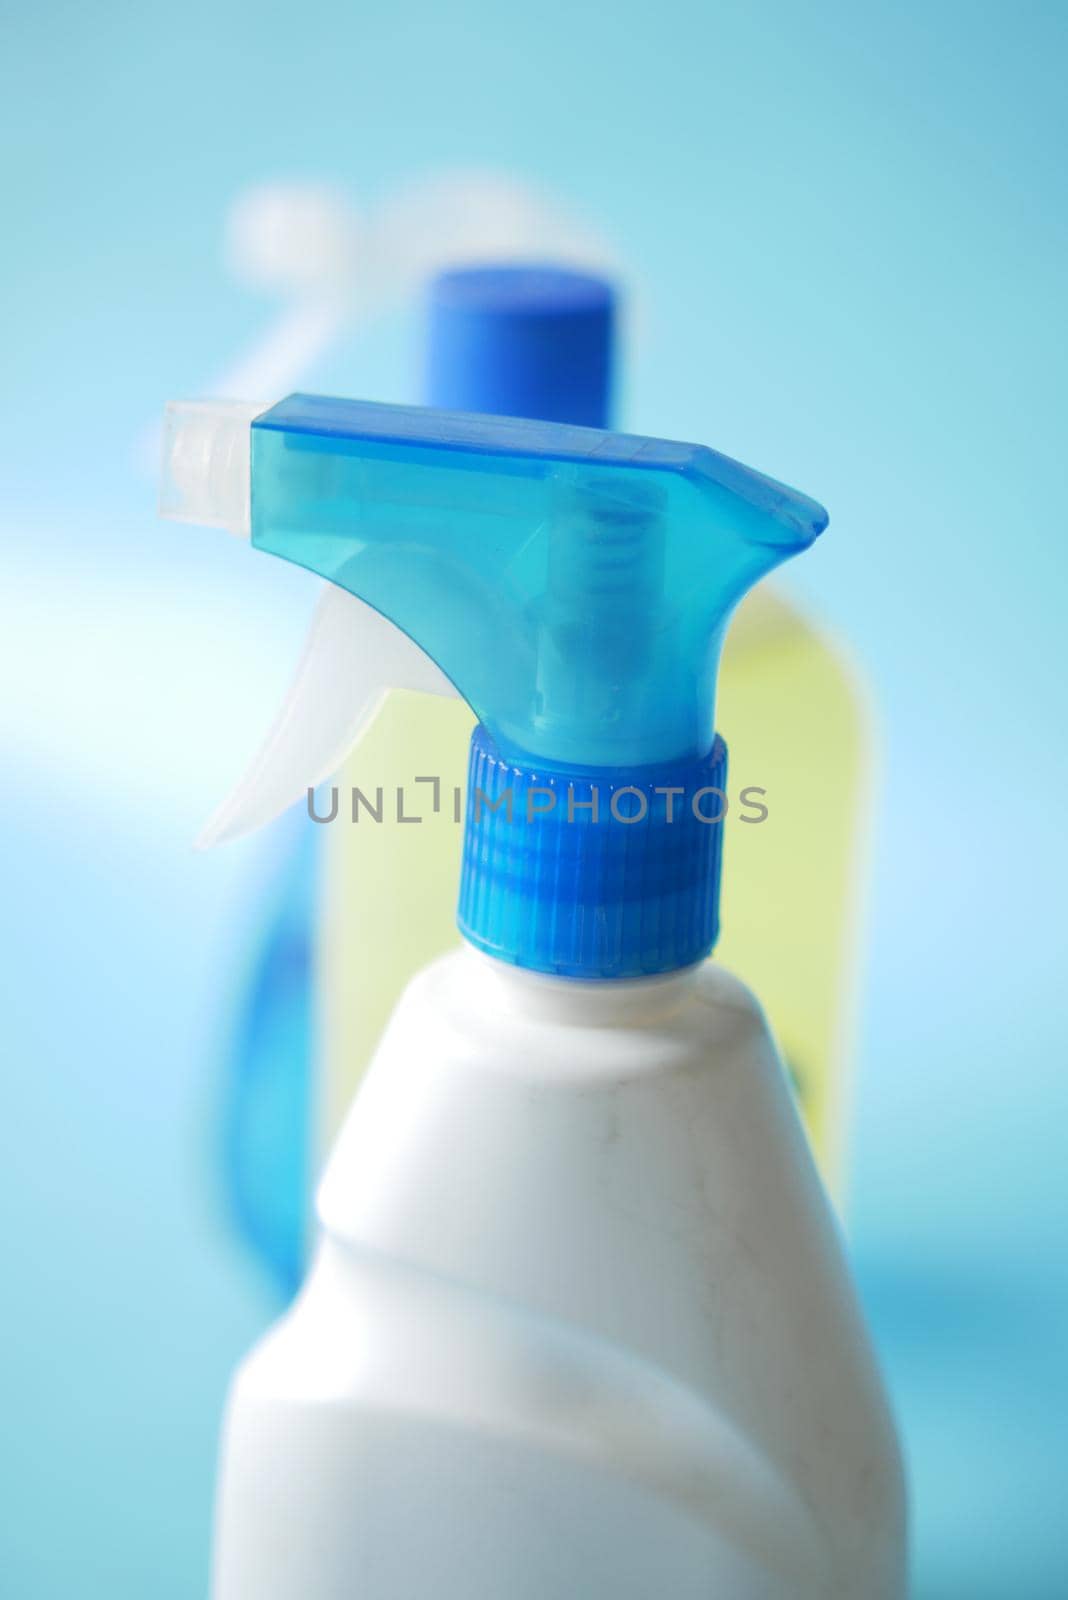 disinfect spray bottles on blue background by towfiq007